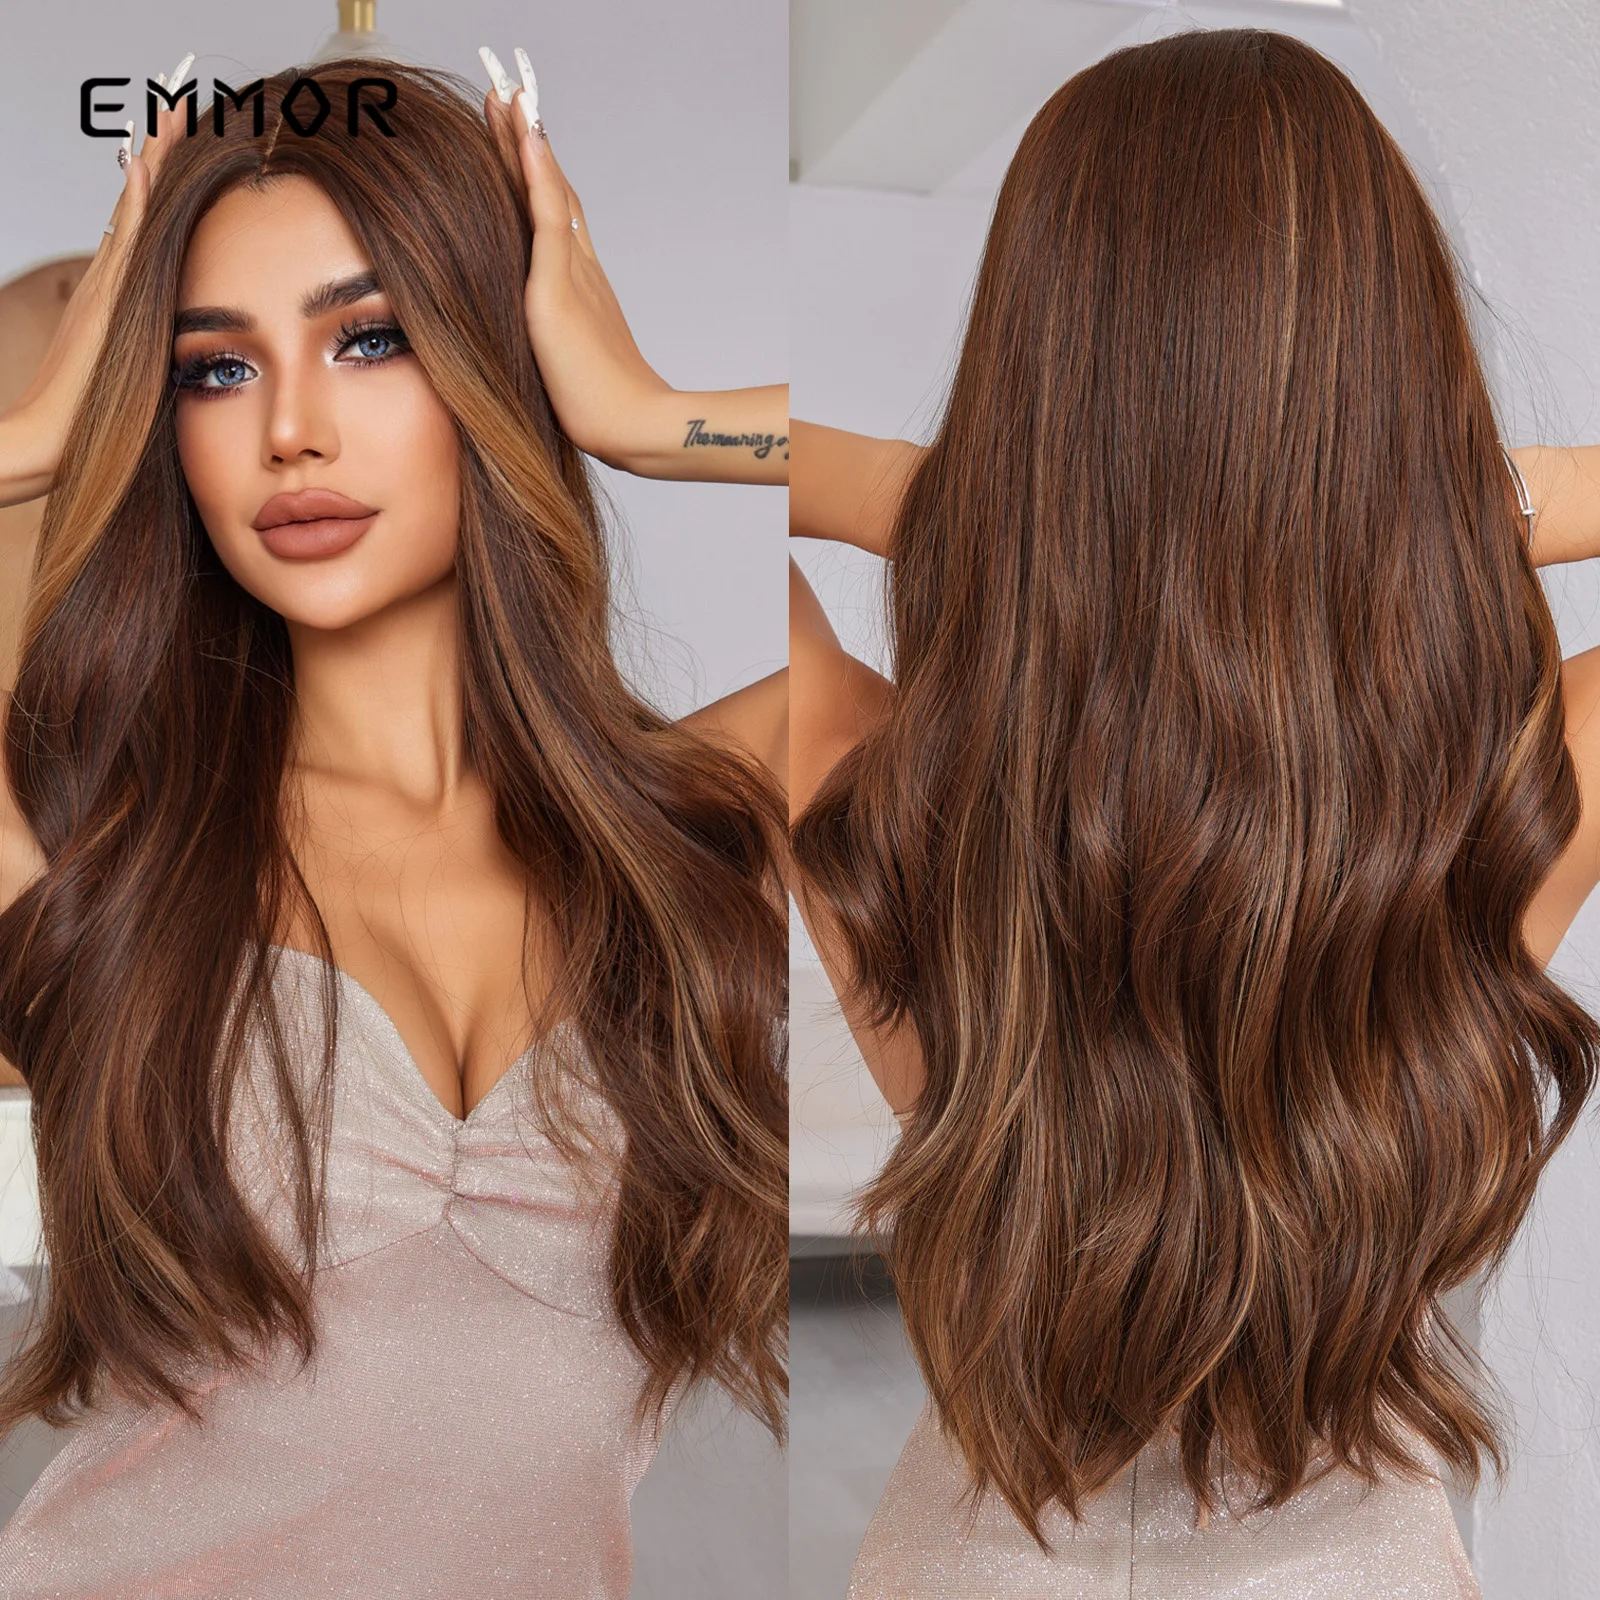 

Synthetic Emmor Curly Wig Ombre Brown Mixed Blonde Wigs for Women Long Wavy with Bangs Natural Party Daily Heat Resistant Hair